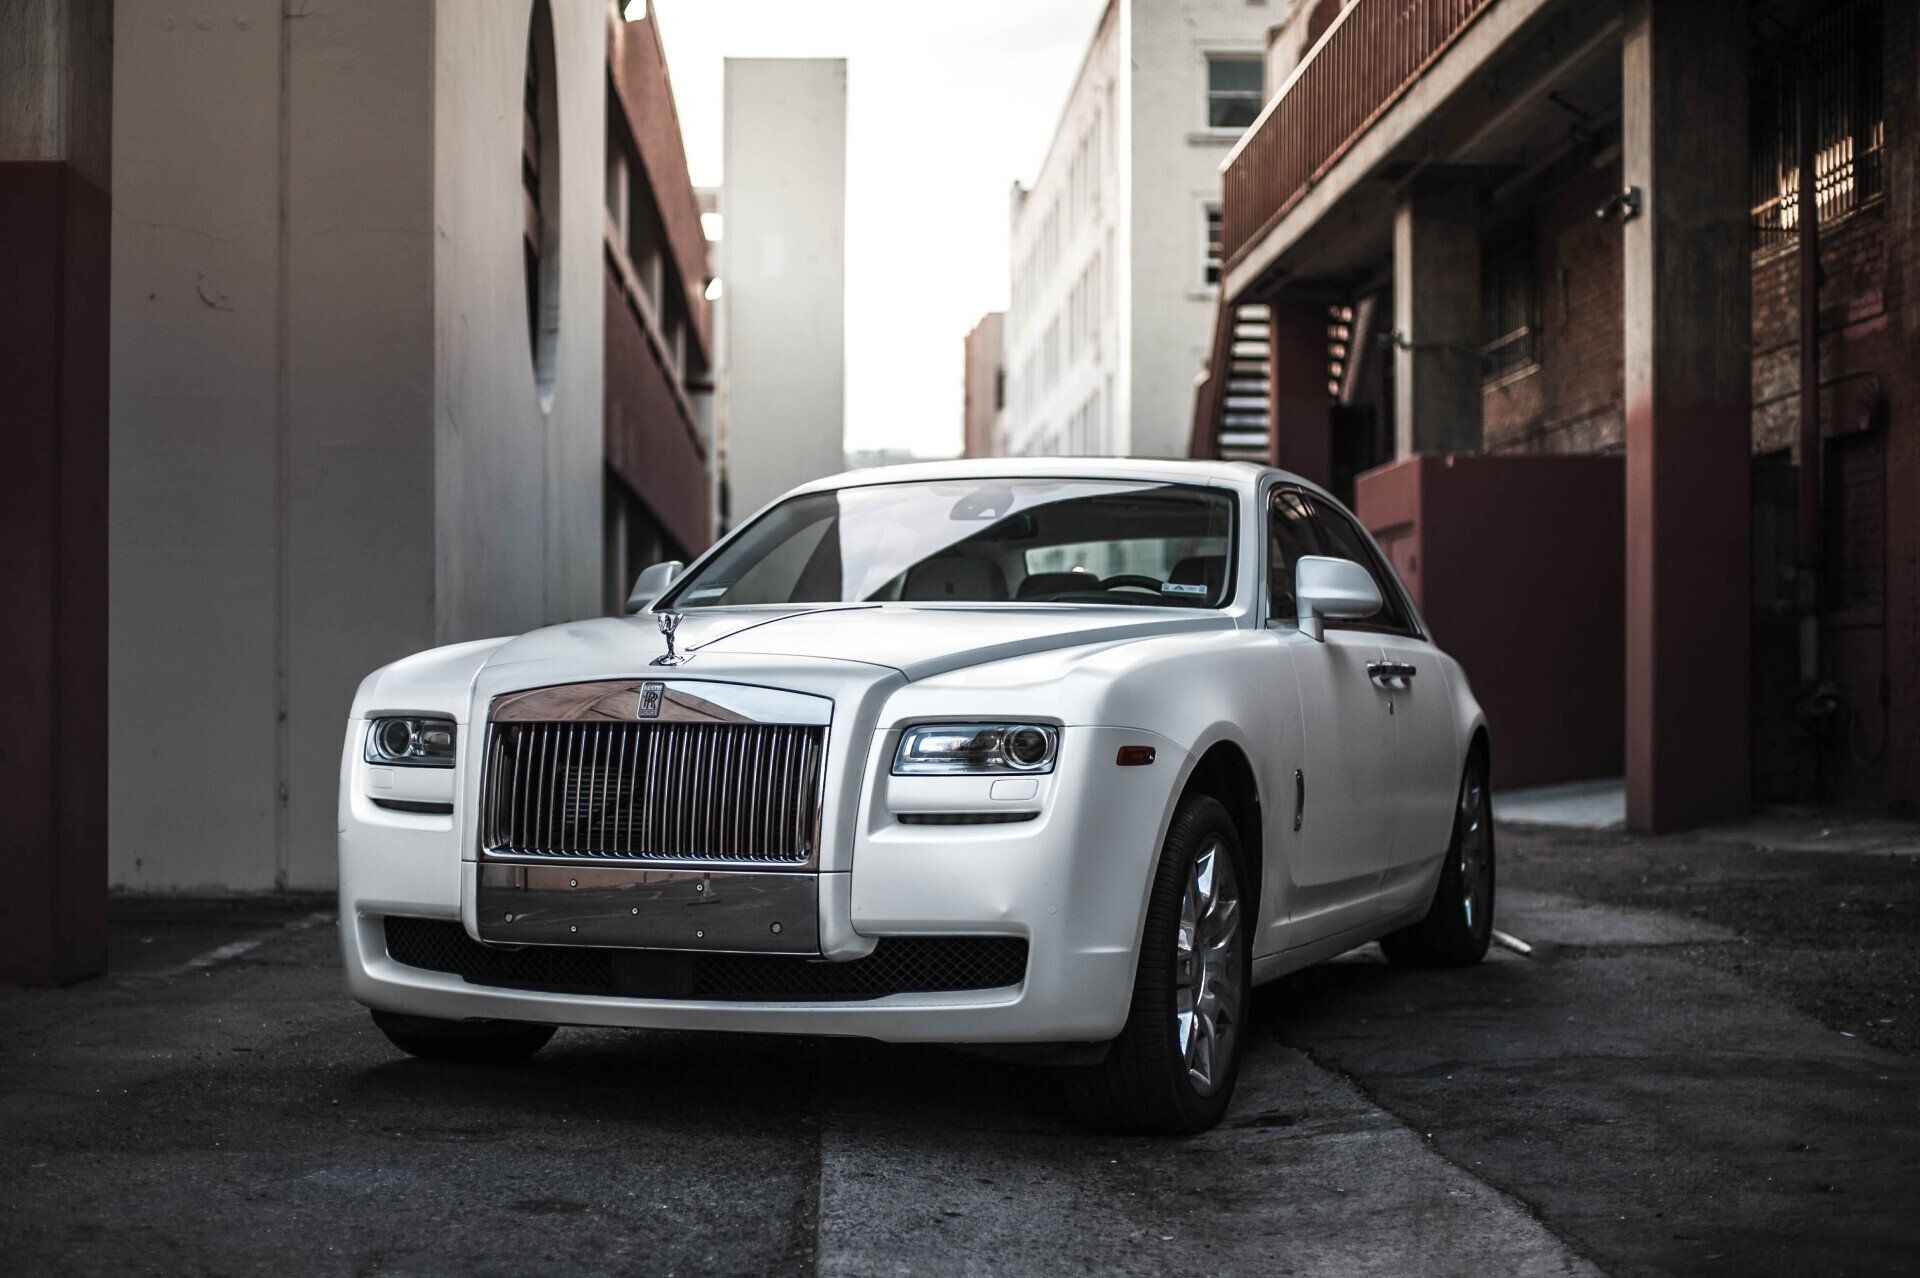 A white rolls royce ghost is parked in a parking lot between two buildings.